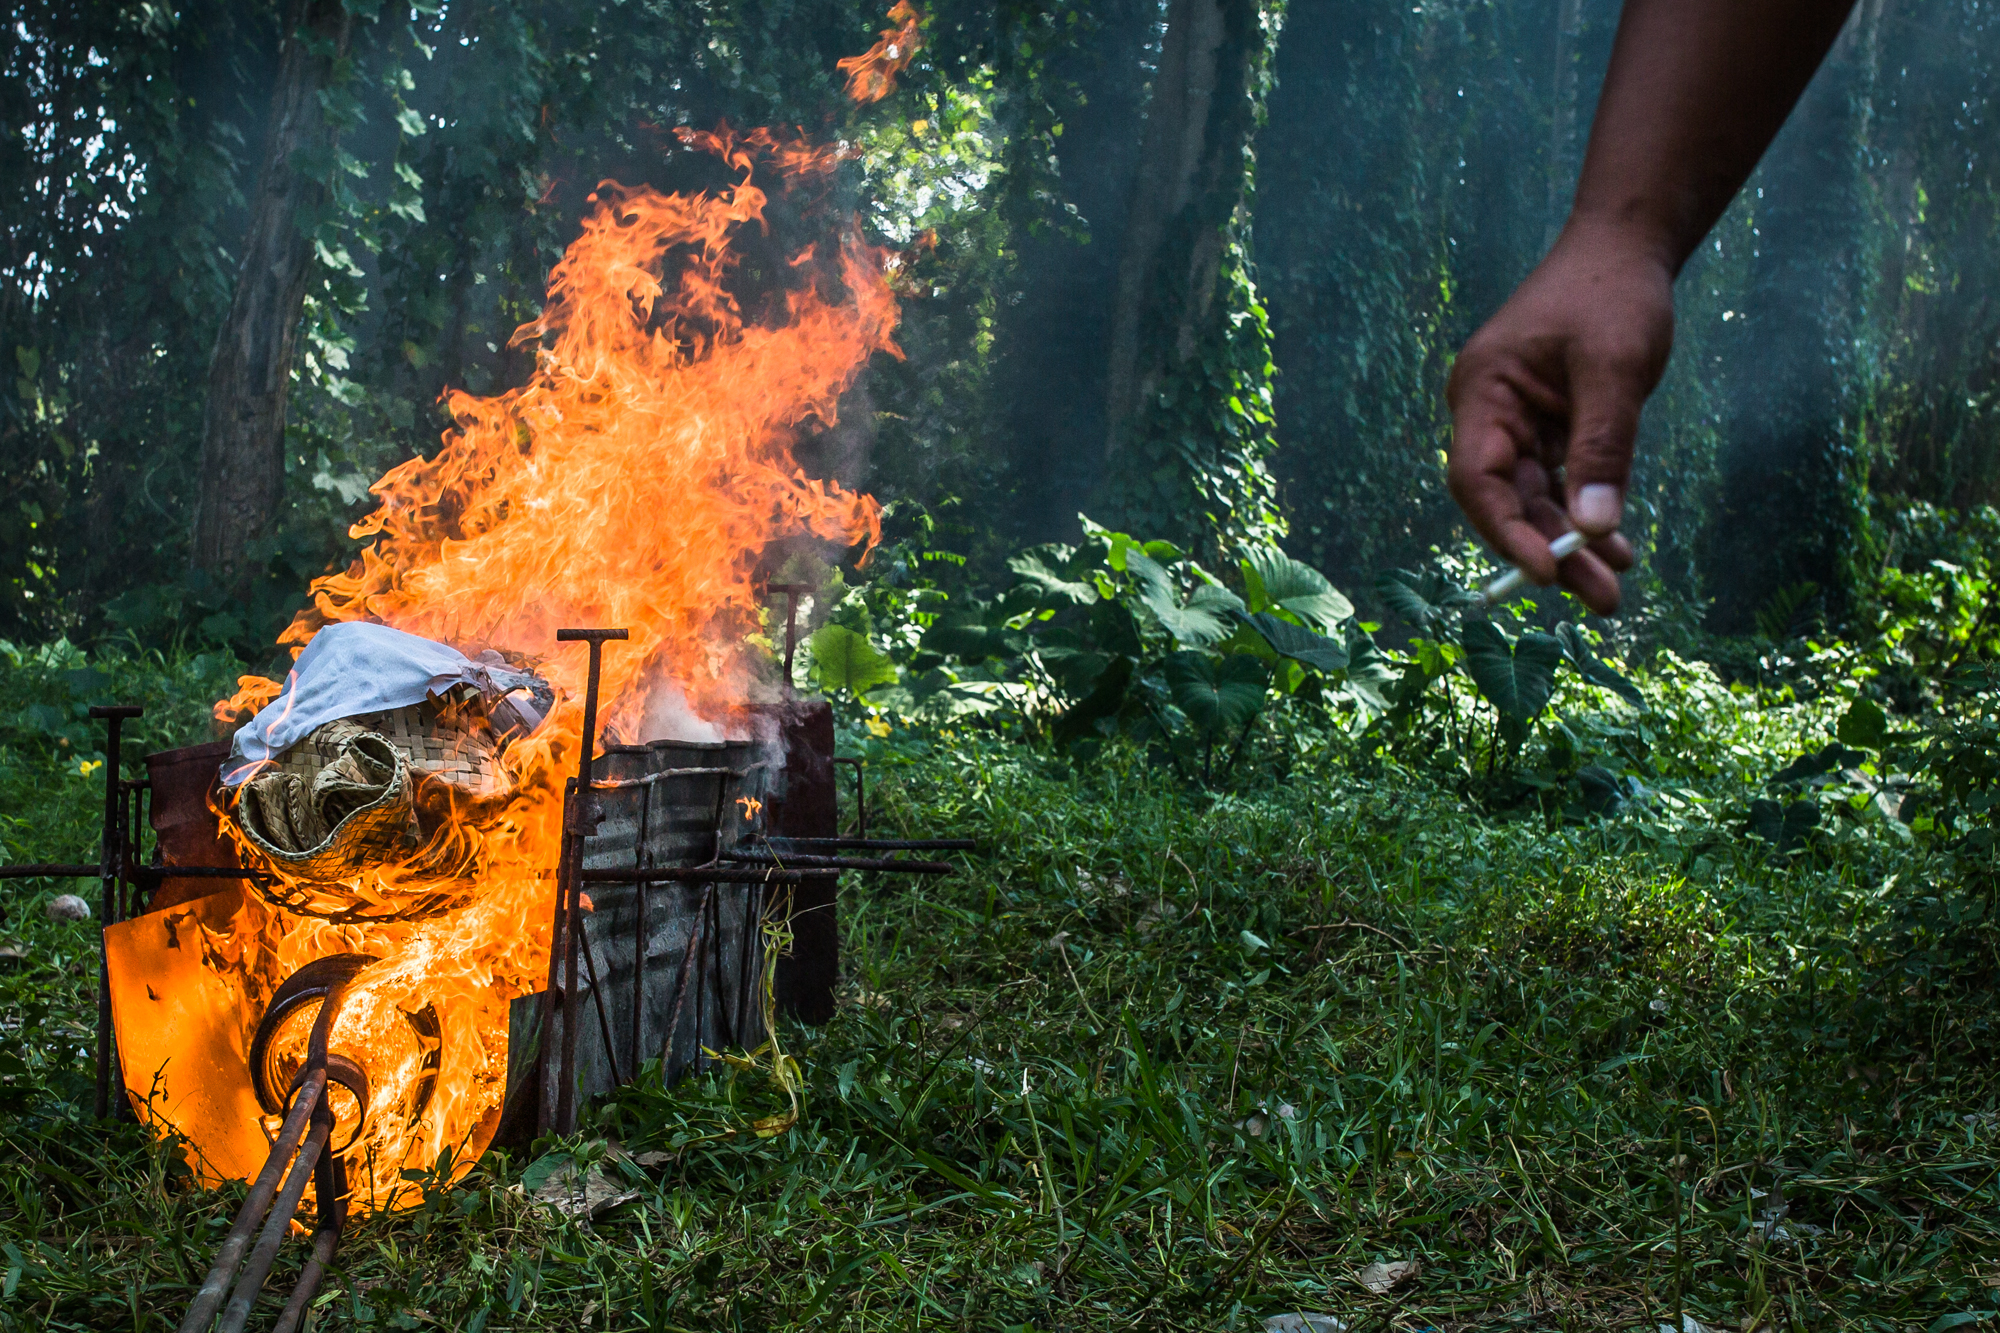 A man with a cigarette looks on as a cremation takes place in Bali, Indonesia